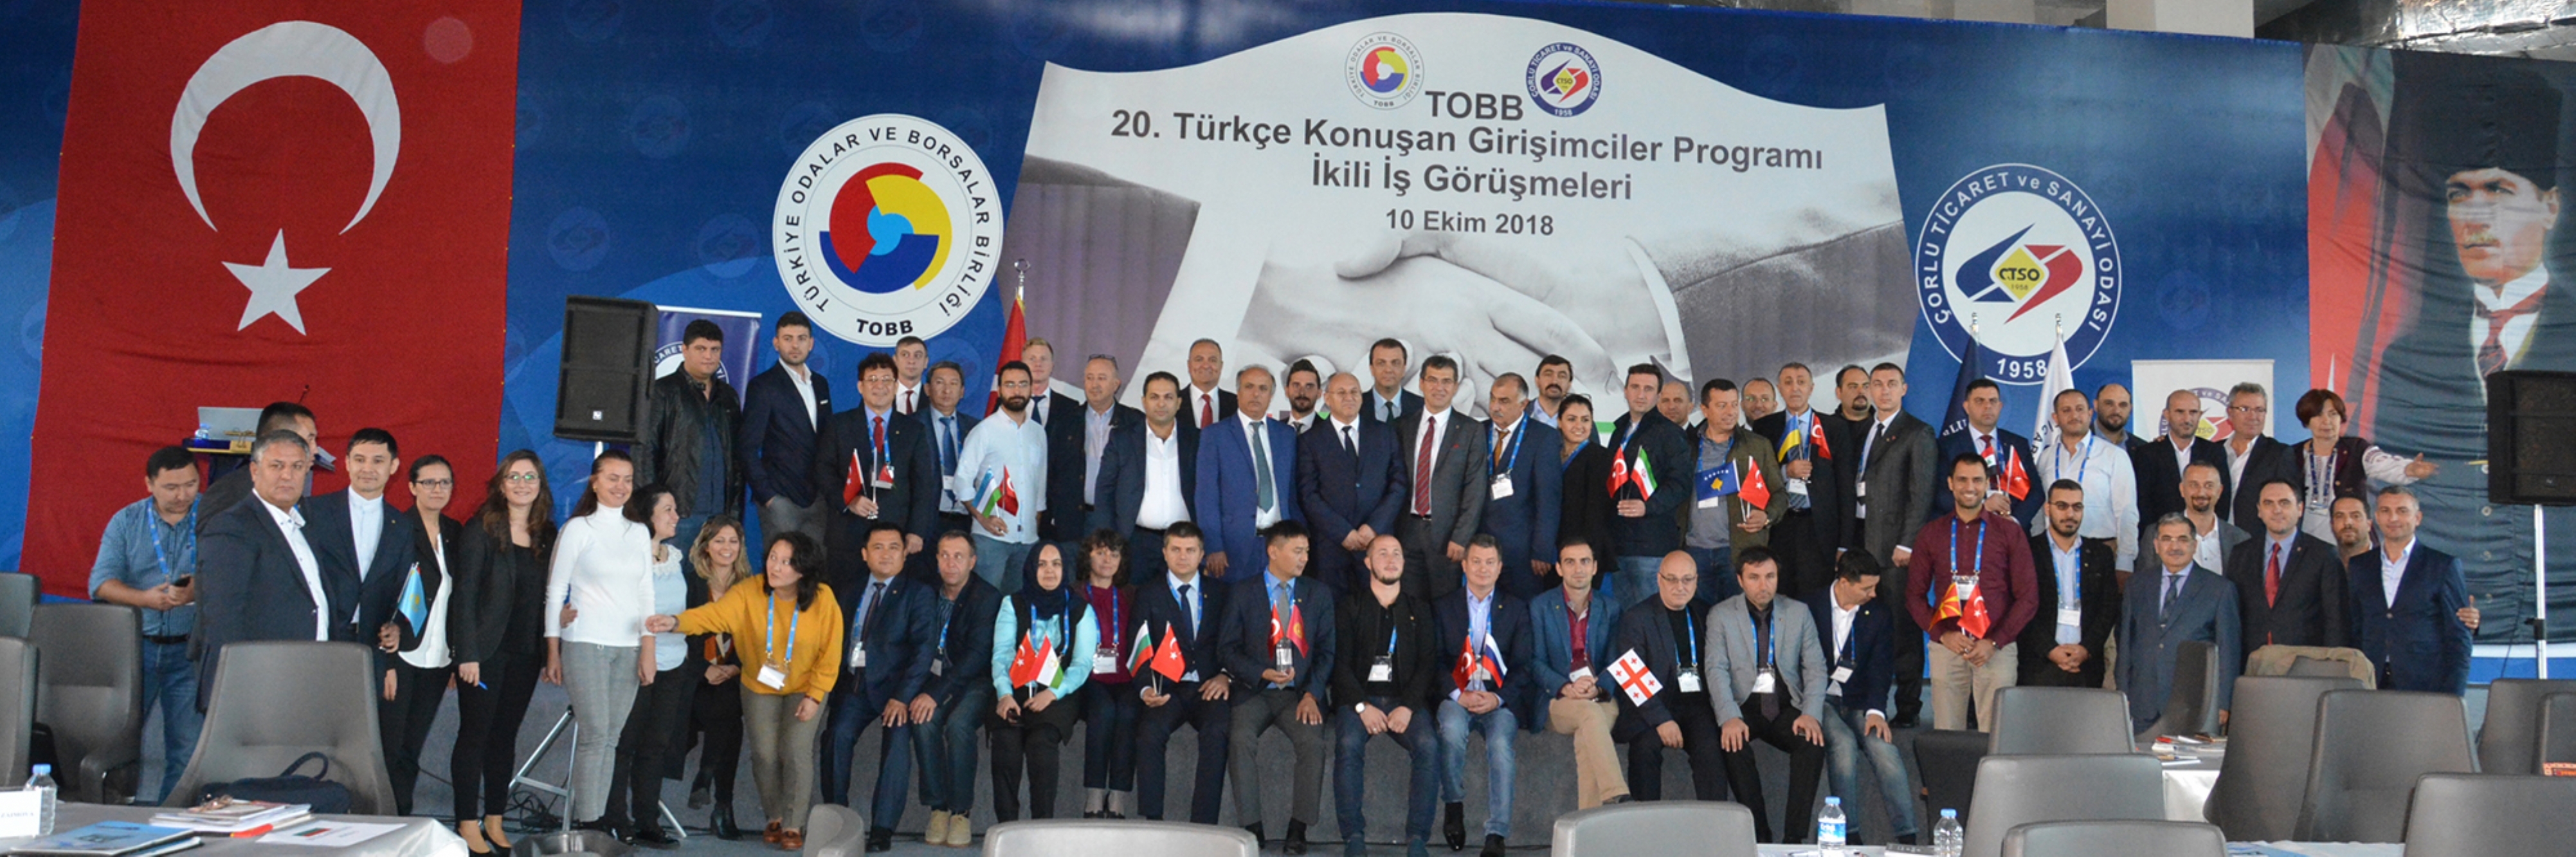 Entrepreneurs  Who Speak Turkısh Came Together Wıth Our Members In Our Chamber